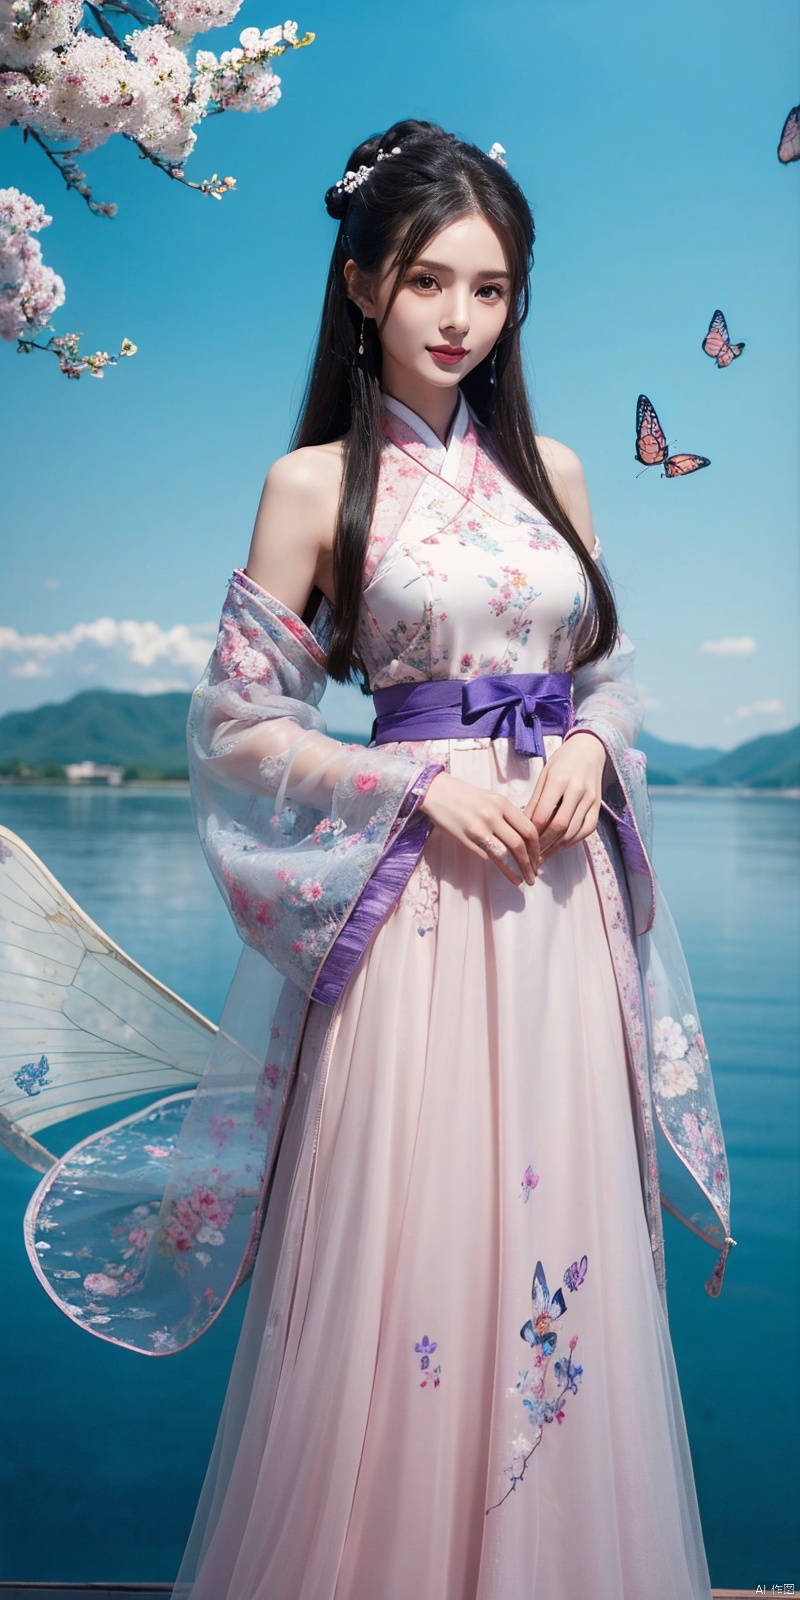  best quality, masterpiece, (cowboy_shot),(Good structure), DSLR Quality,Depth of field,kind smile,looking_at_viewer,Dynamic pose, line art,line style,as style,best quality,masterpiece, The image features a beautiful anime-style illustration of a young woman. She has long black hair and is dressed in a traditional Chinese outfit. The outfit consists of a white top with blue and purple accents, a long skirt, and a butterfly-shaped mirror in her hand. She stands against a backdrop of a clear blue sky and a body of water, with butterflies fluttering around her. AI painting pure tag structure: anime, art, illustration, traditional clothes, blue, white, long hair, black hair, butterfly, mirror, sky, water, , chineseclothes, , liruotong